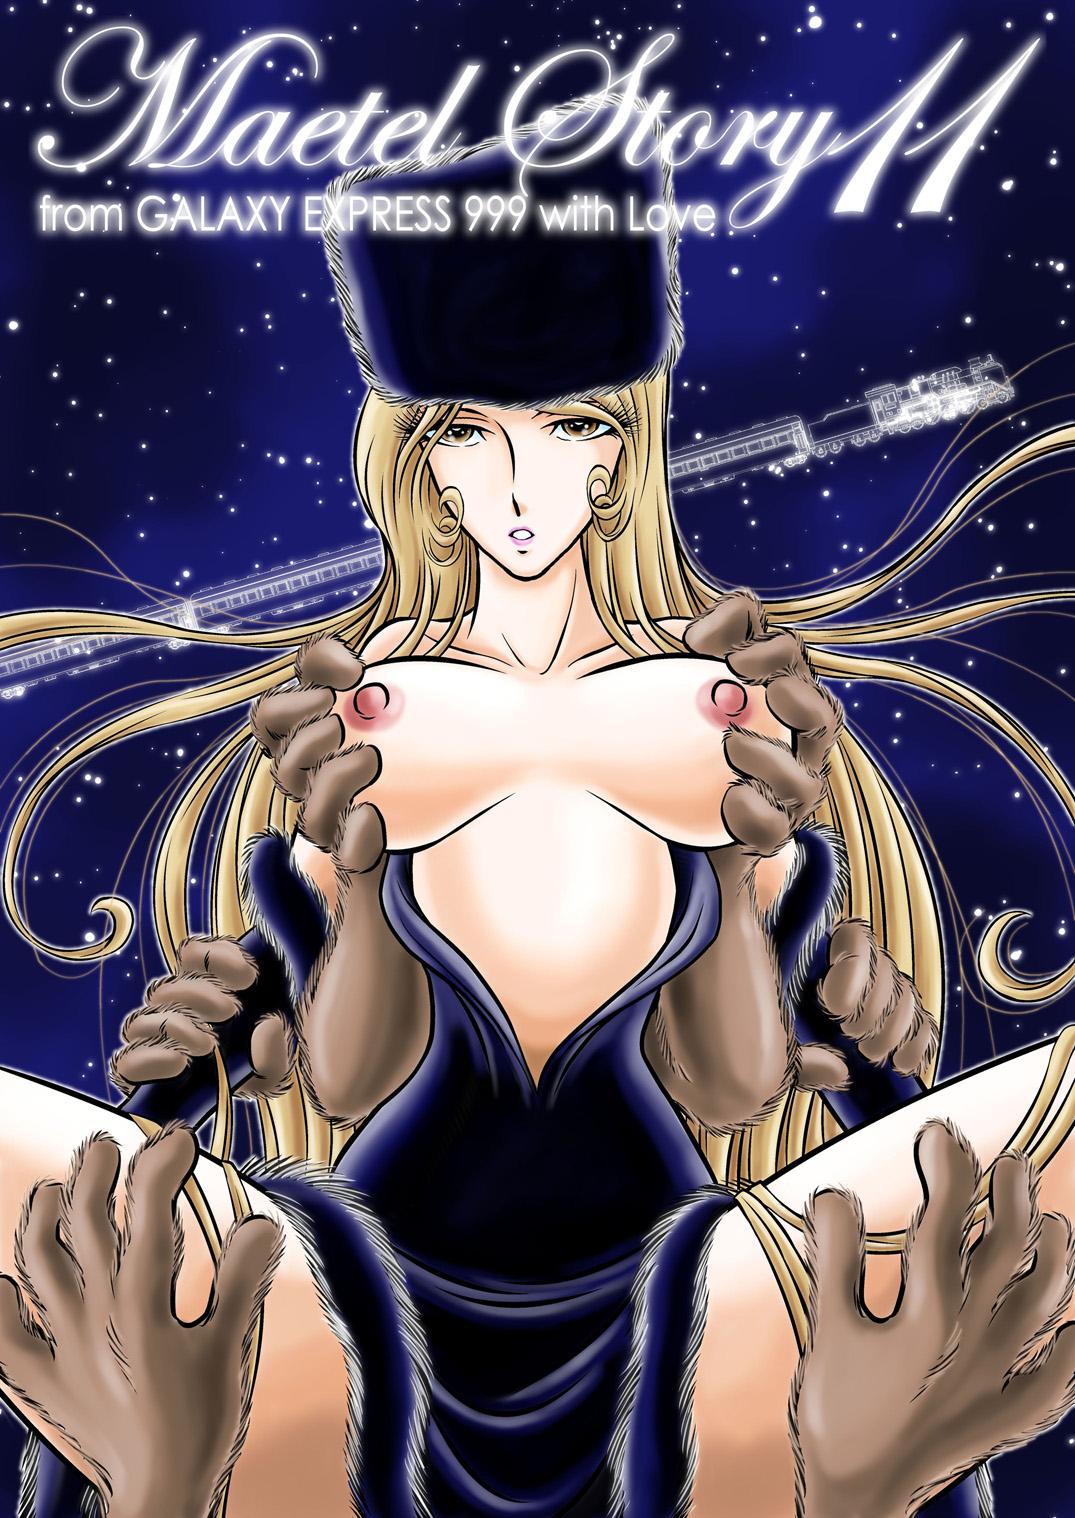 Mama Maetel Story 11 - Galaxy express 999 Anal Porn - Picture 1